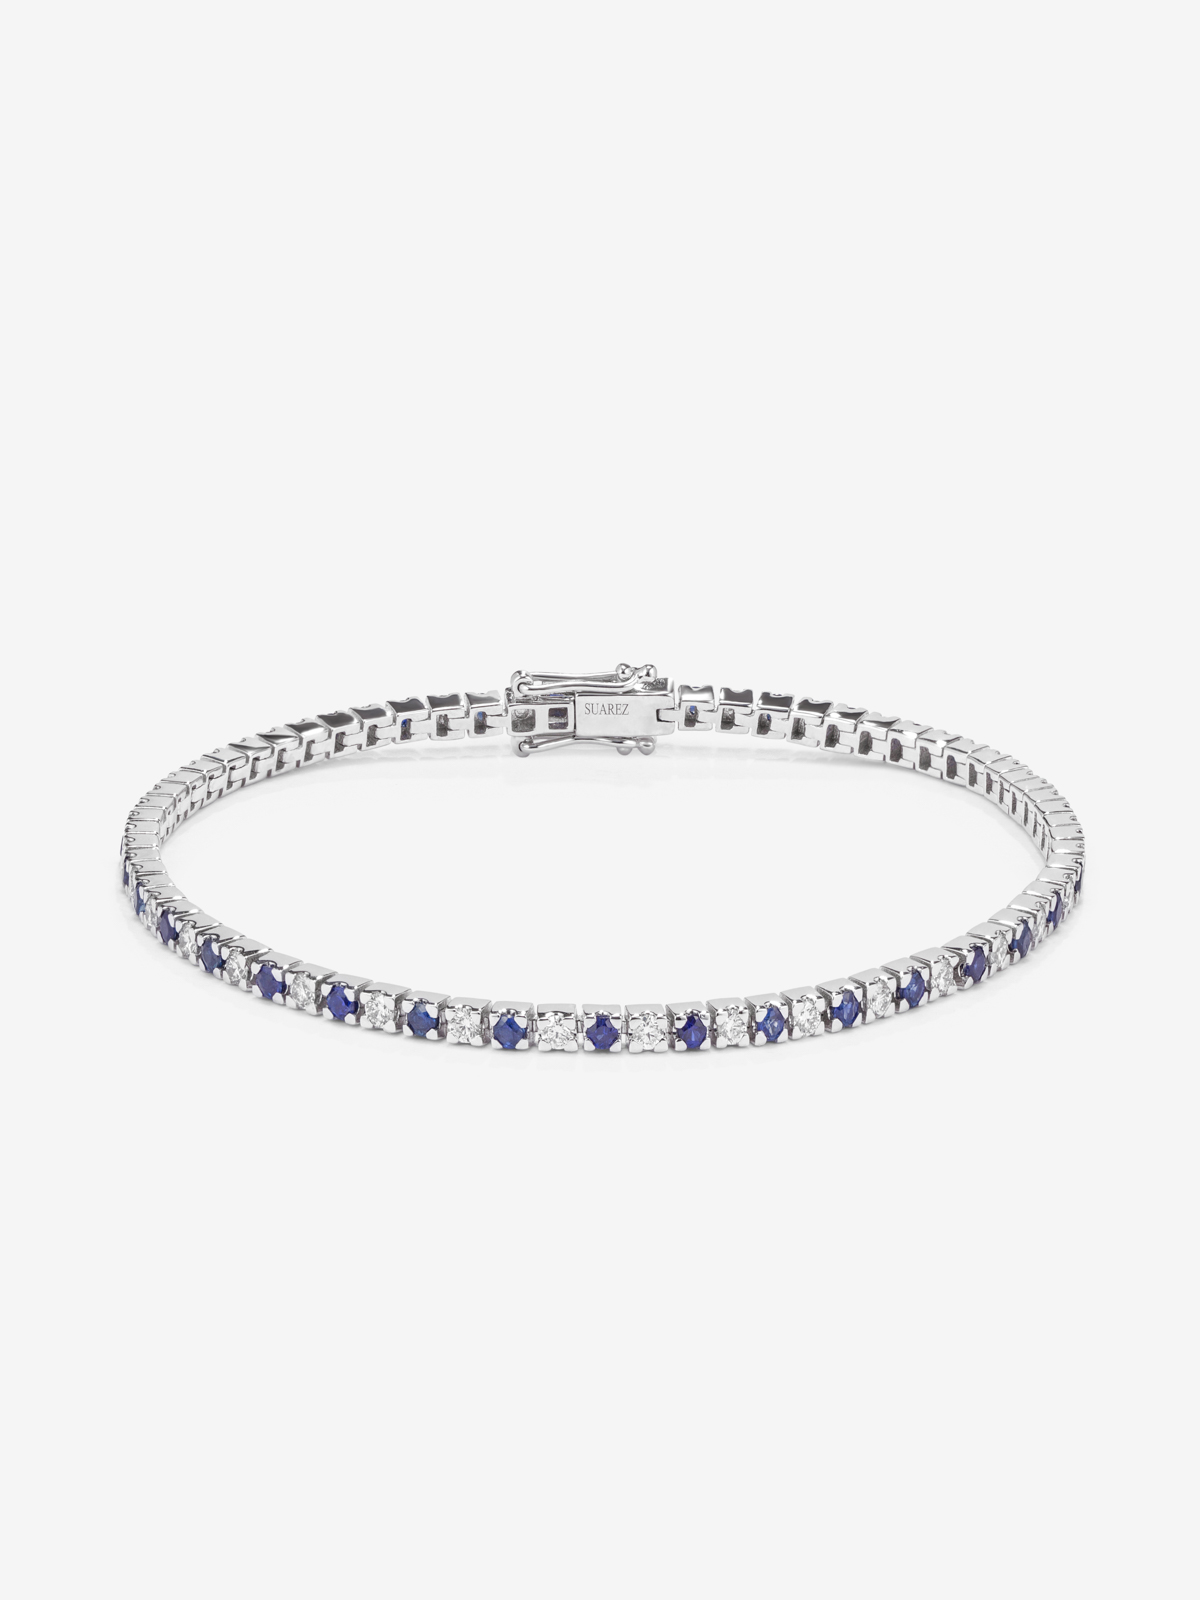 18K white gold riviere bracelet with diamond and sapphire